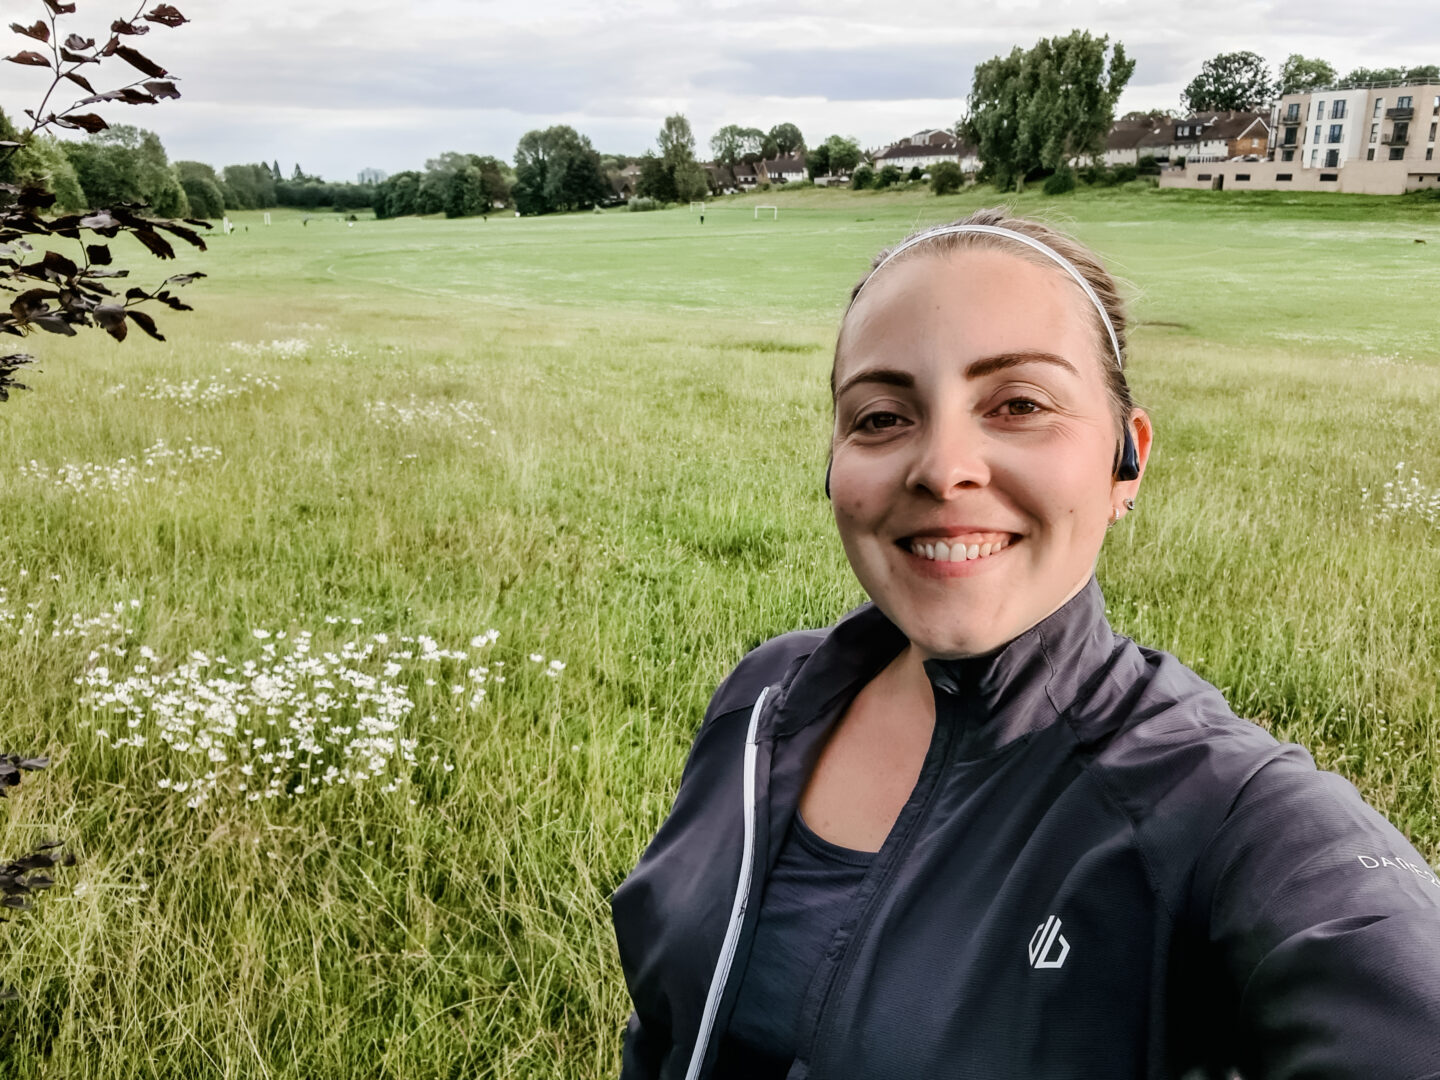 Selfie of woman wearing grey running kit with a green field behind her